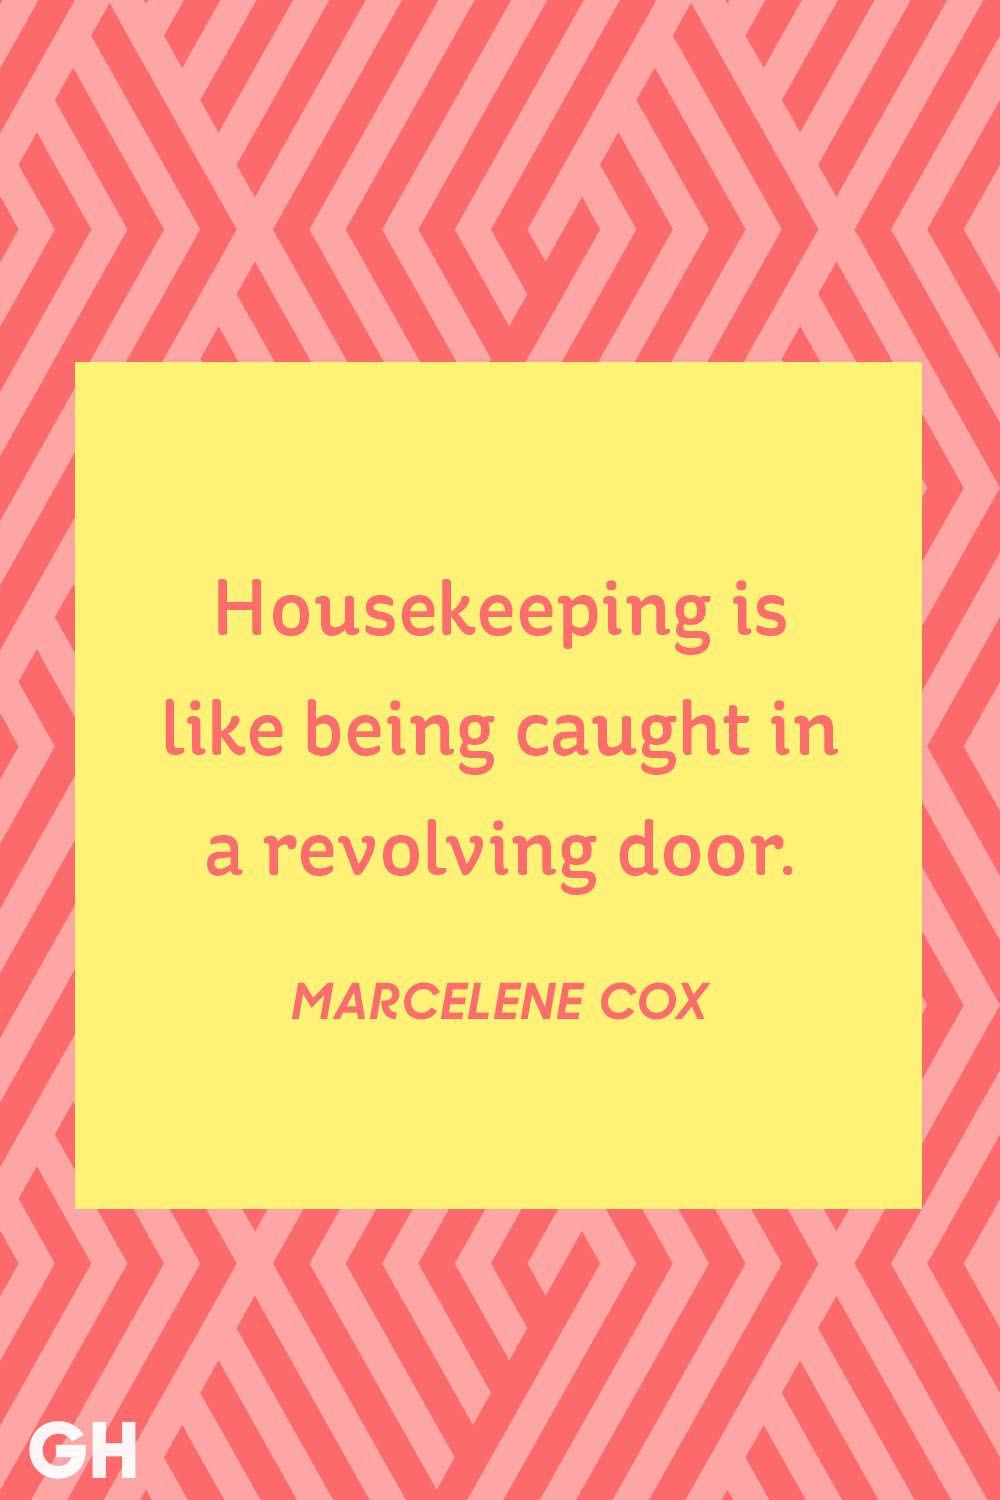 ghk funny cleaning quotes marcelene cox 1532709646